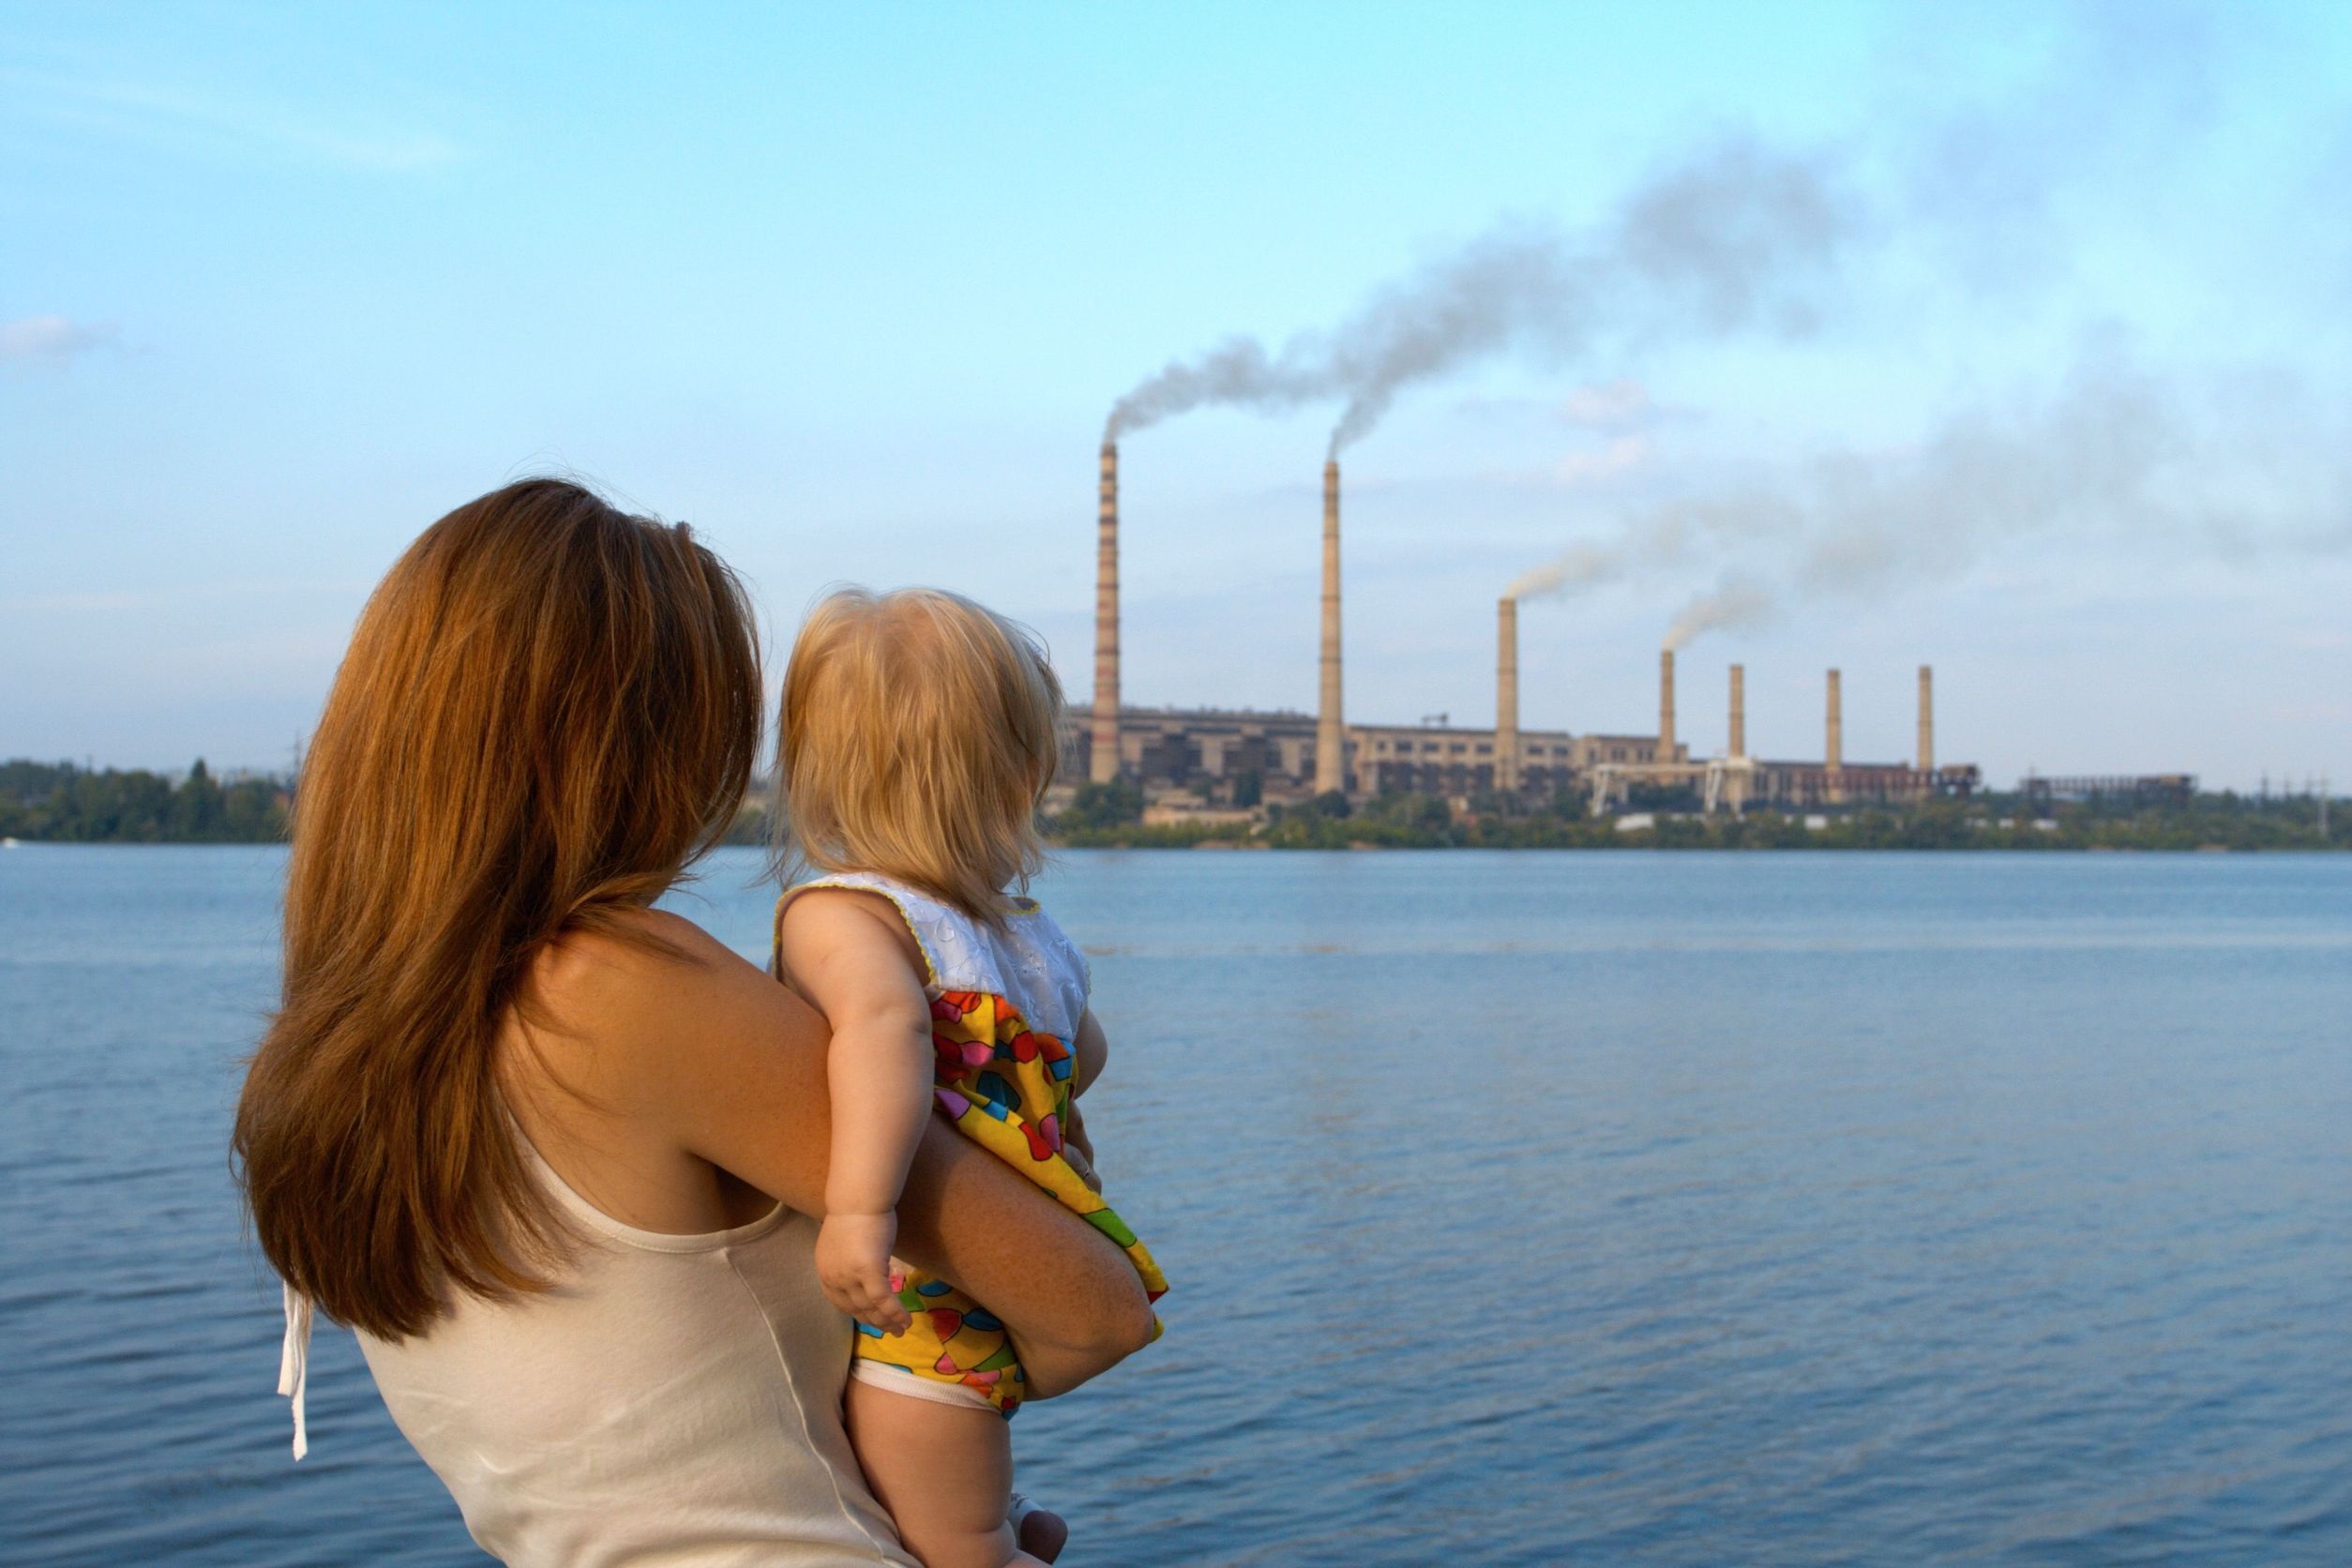 People With Higher Air Pollution Exposure In Childhood Have More Mental Health Problems By Age 18